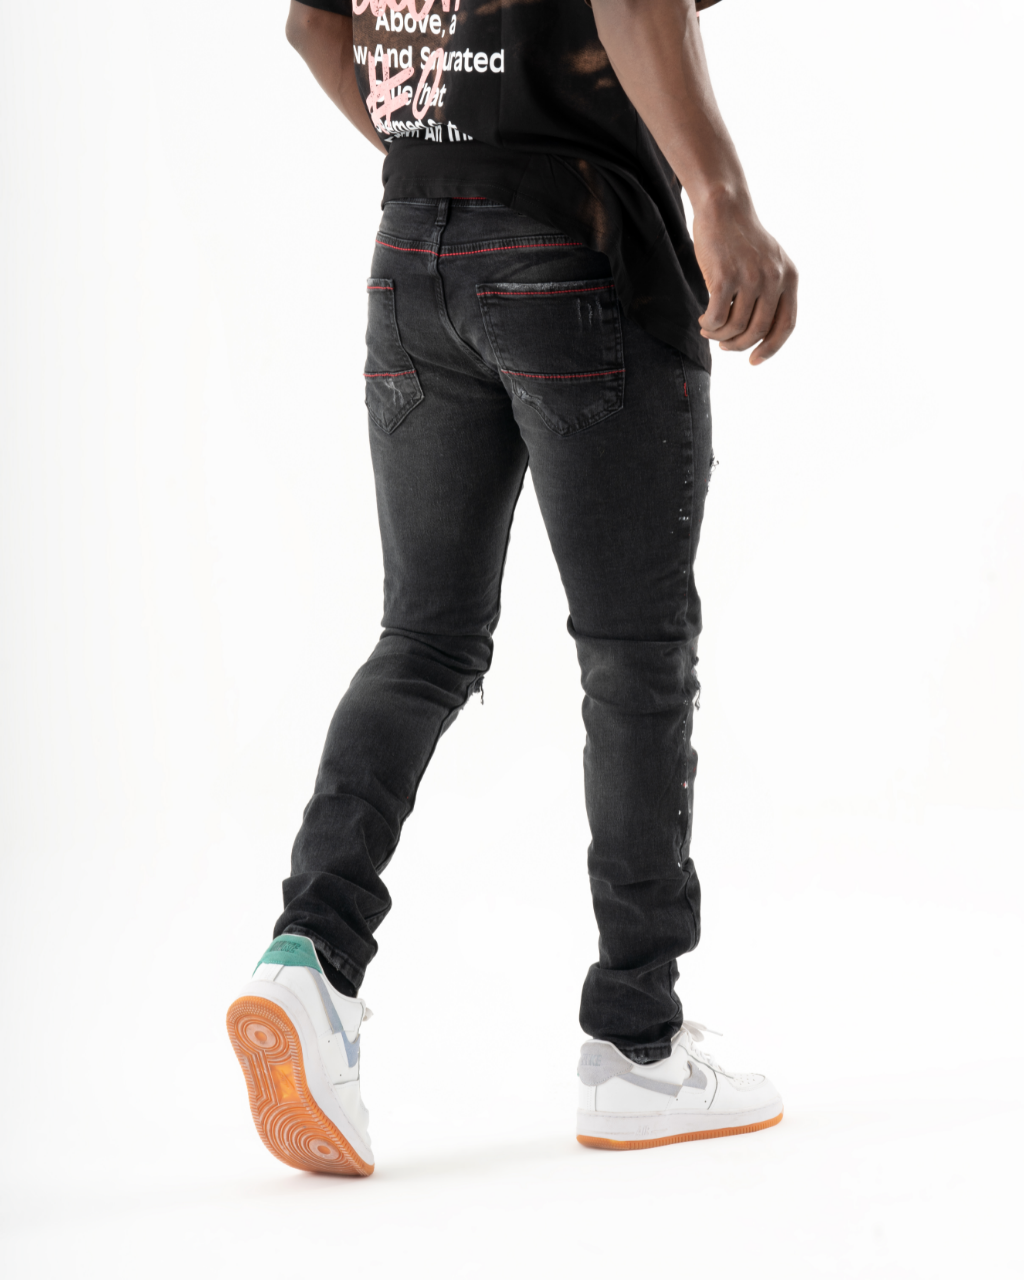 A man donning black HOTSPOT jeans and a white t-shirt exudes mens streetwear style.